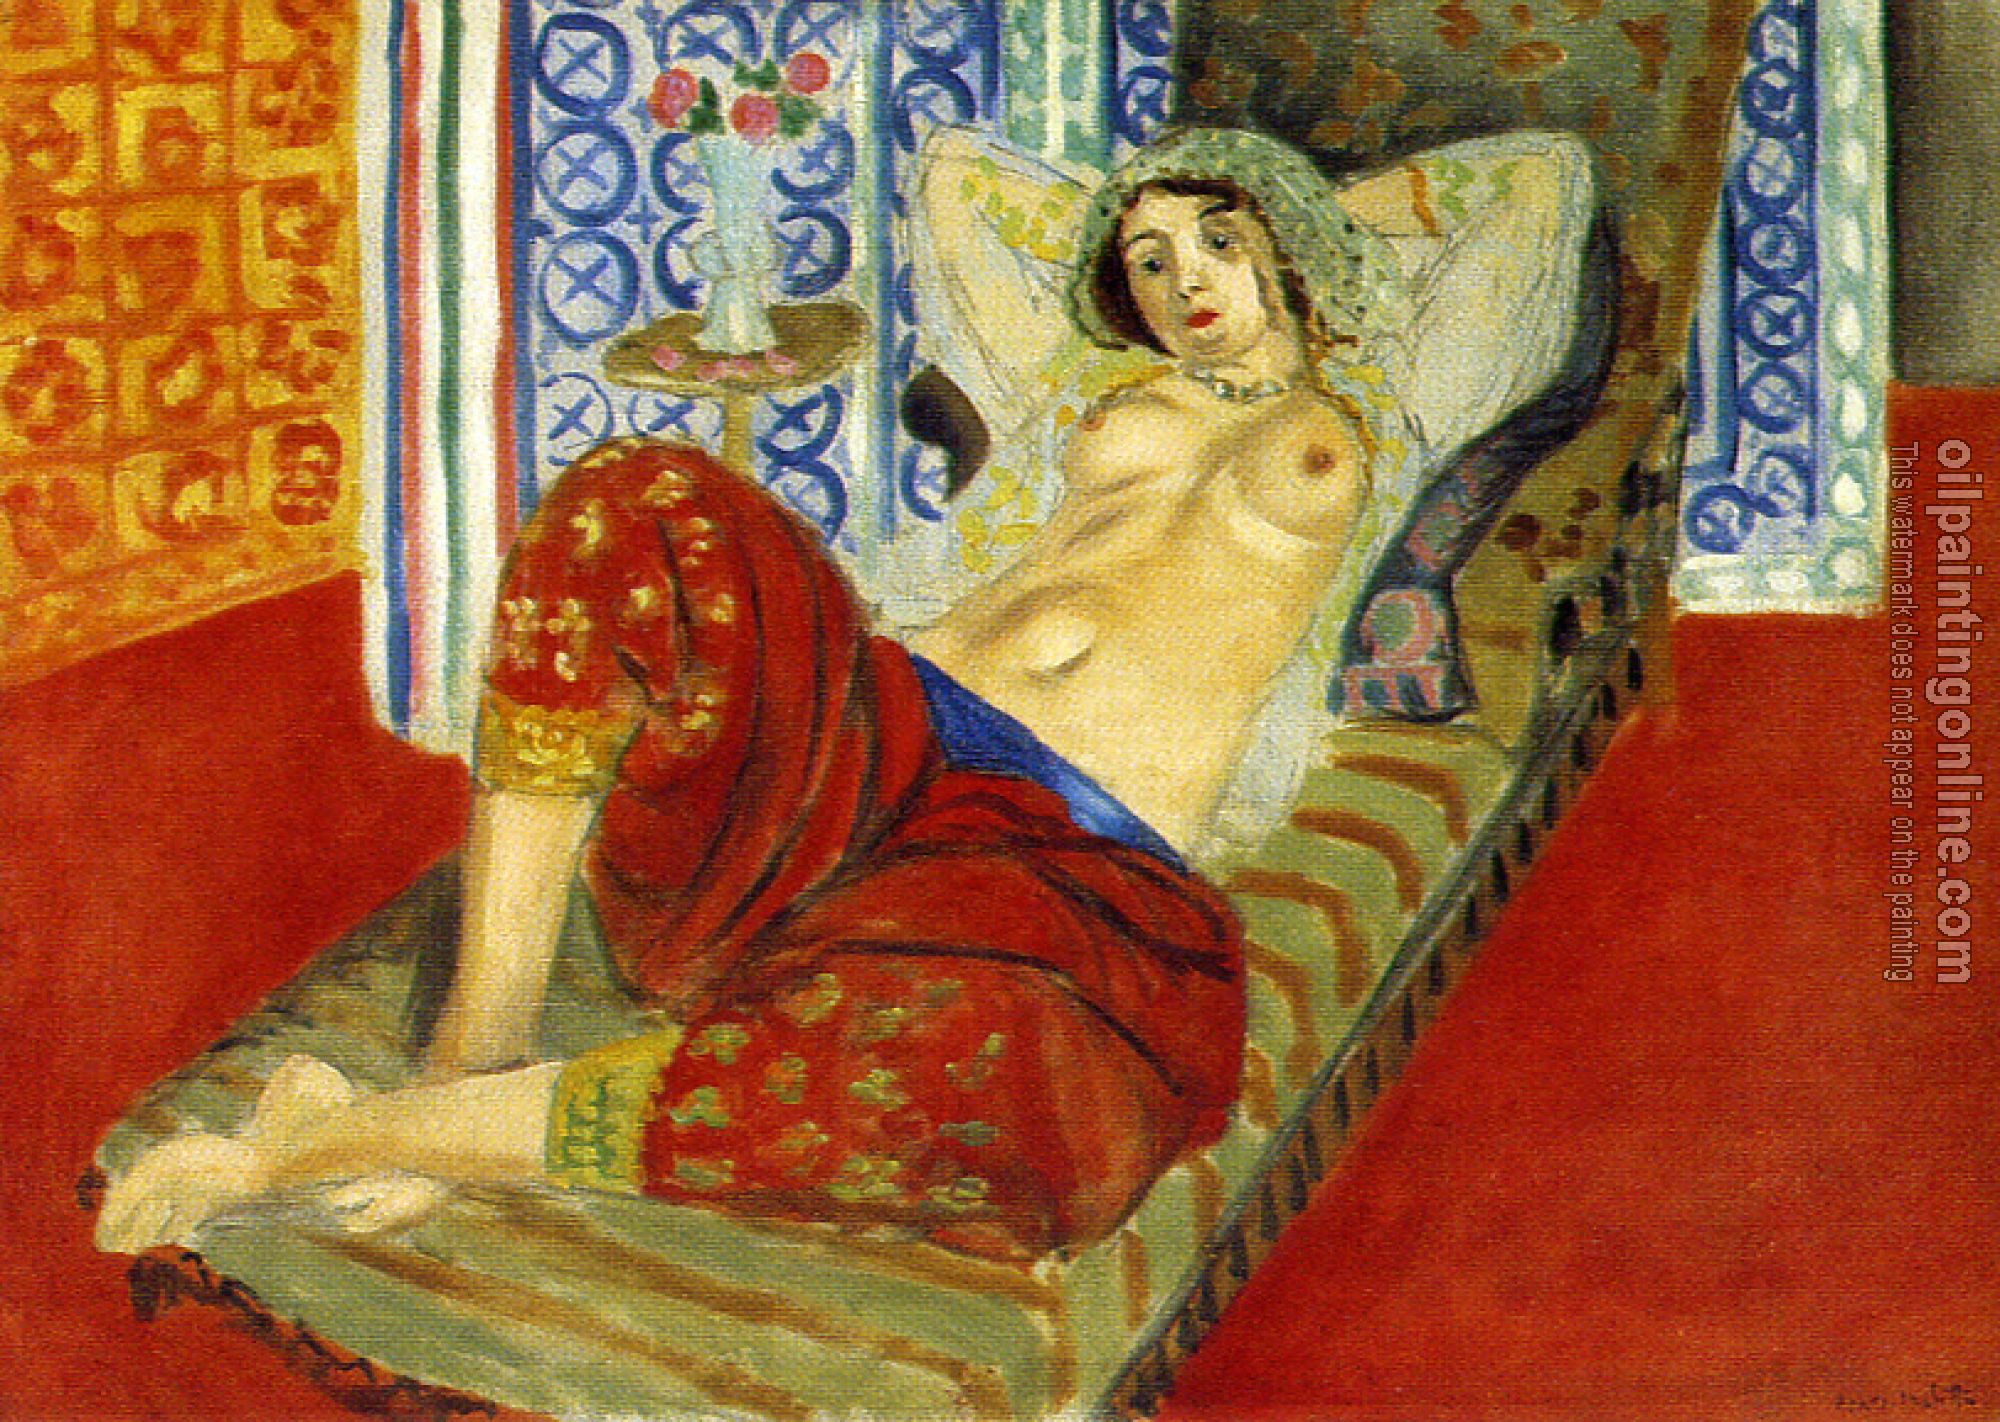 Matisse, Henri Emile Benoit - odalisque with red culottes